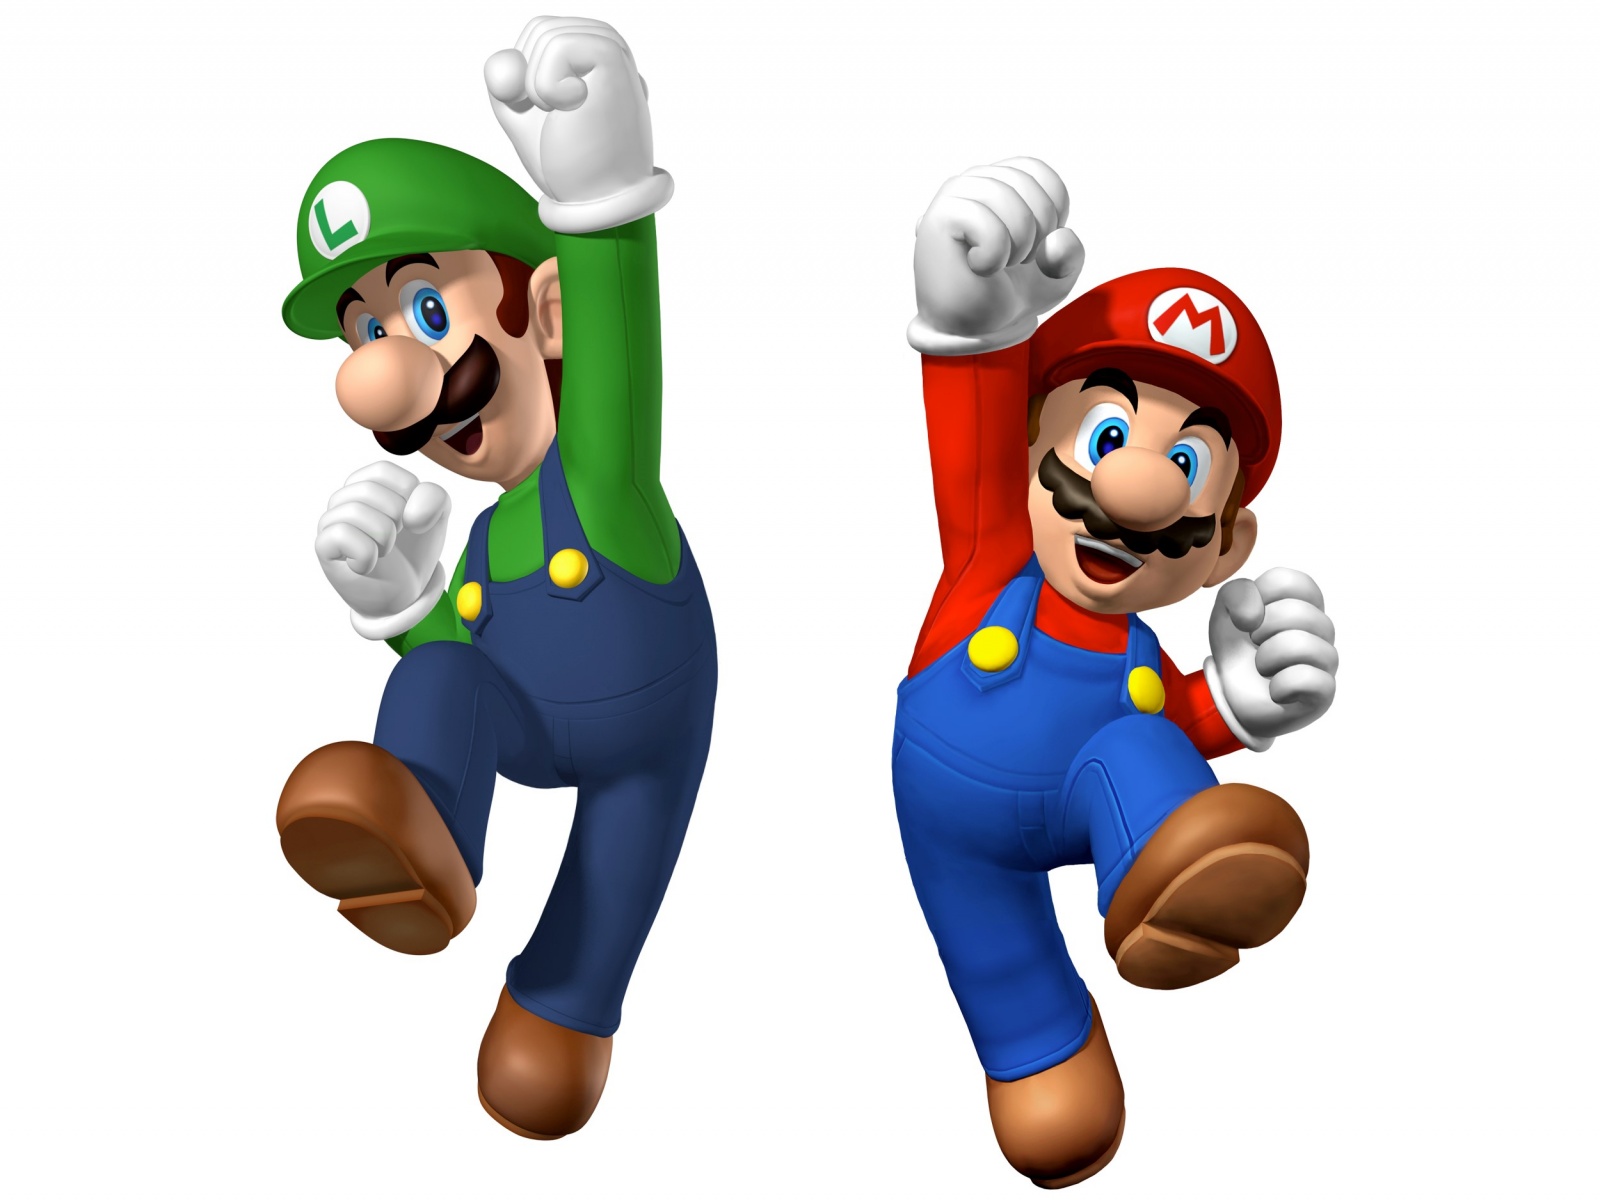 all-of-nintendos-android-and-ios-games-will-be-free-to-play-image-cultofandroidcomwp-contentuploads201511Mario_and_luigi-6-jpg